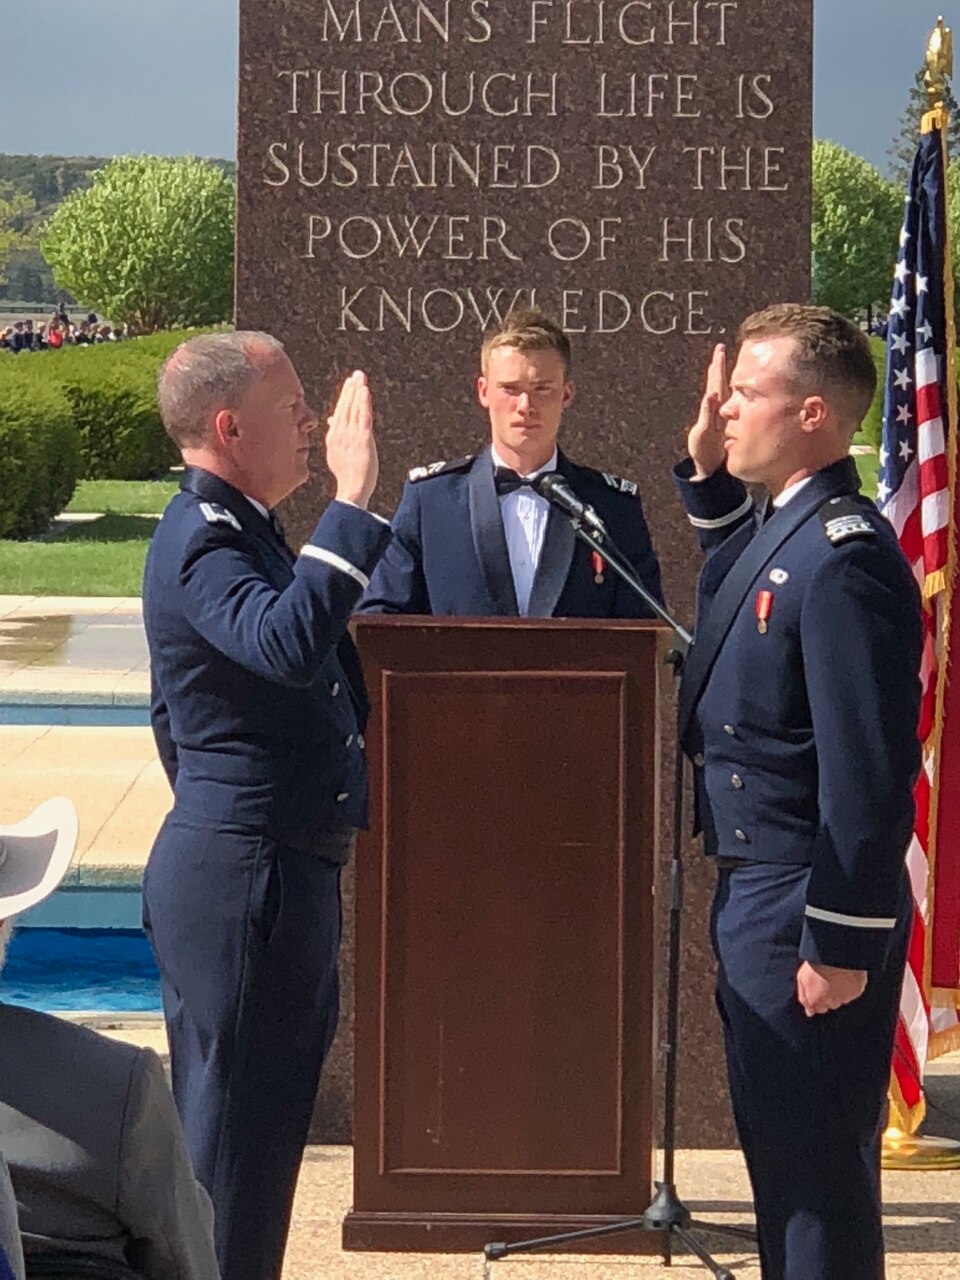 Two men raise hands in an Air Force commissioning ceremony